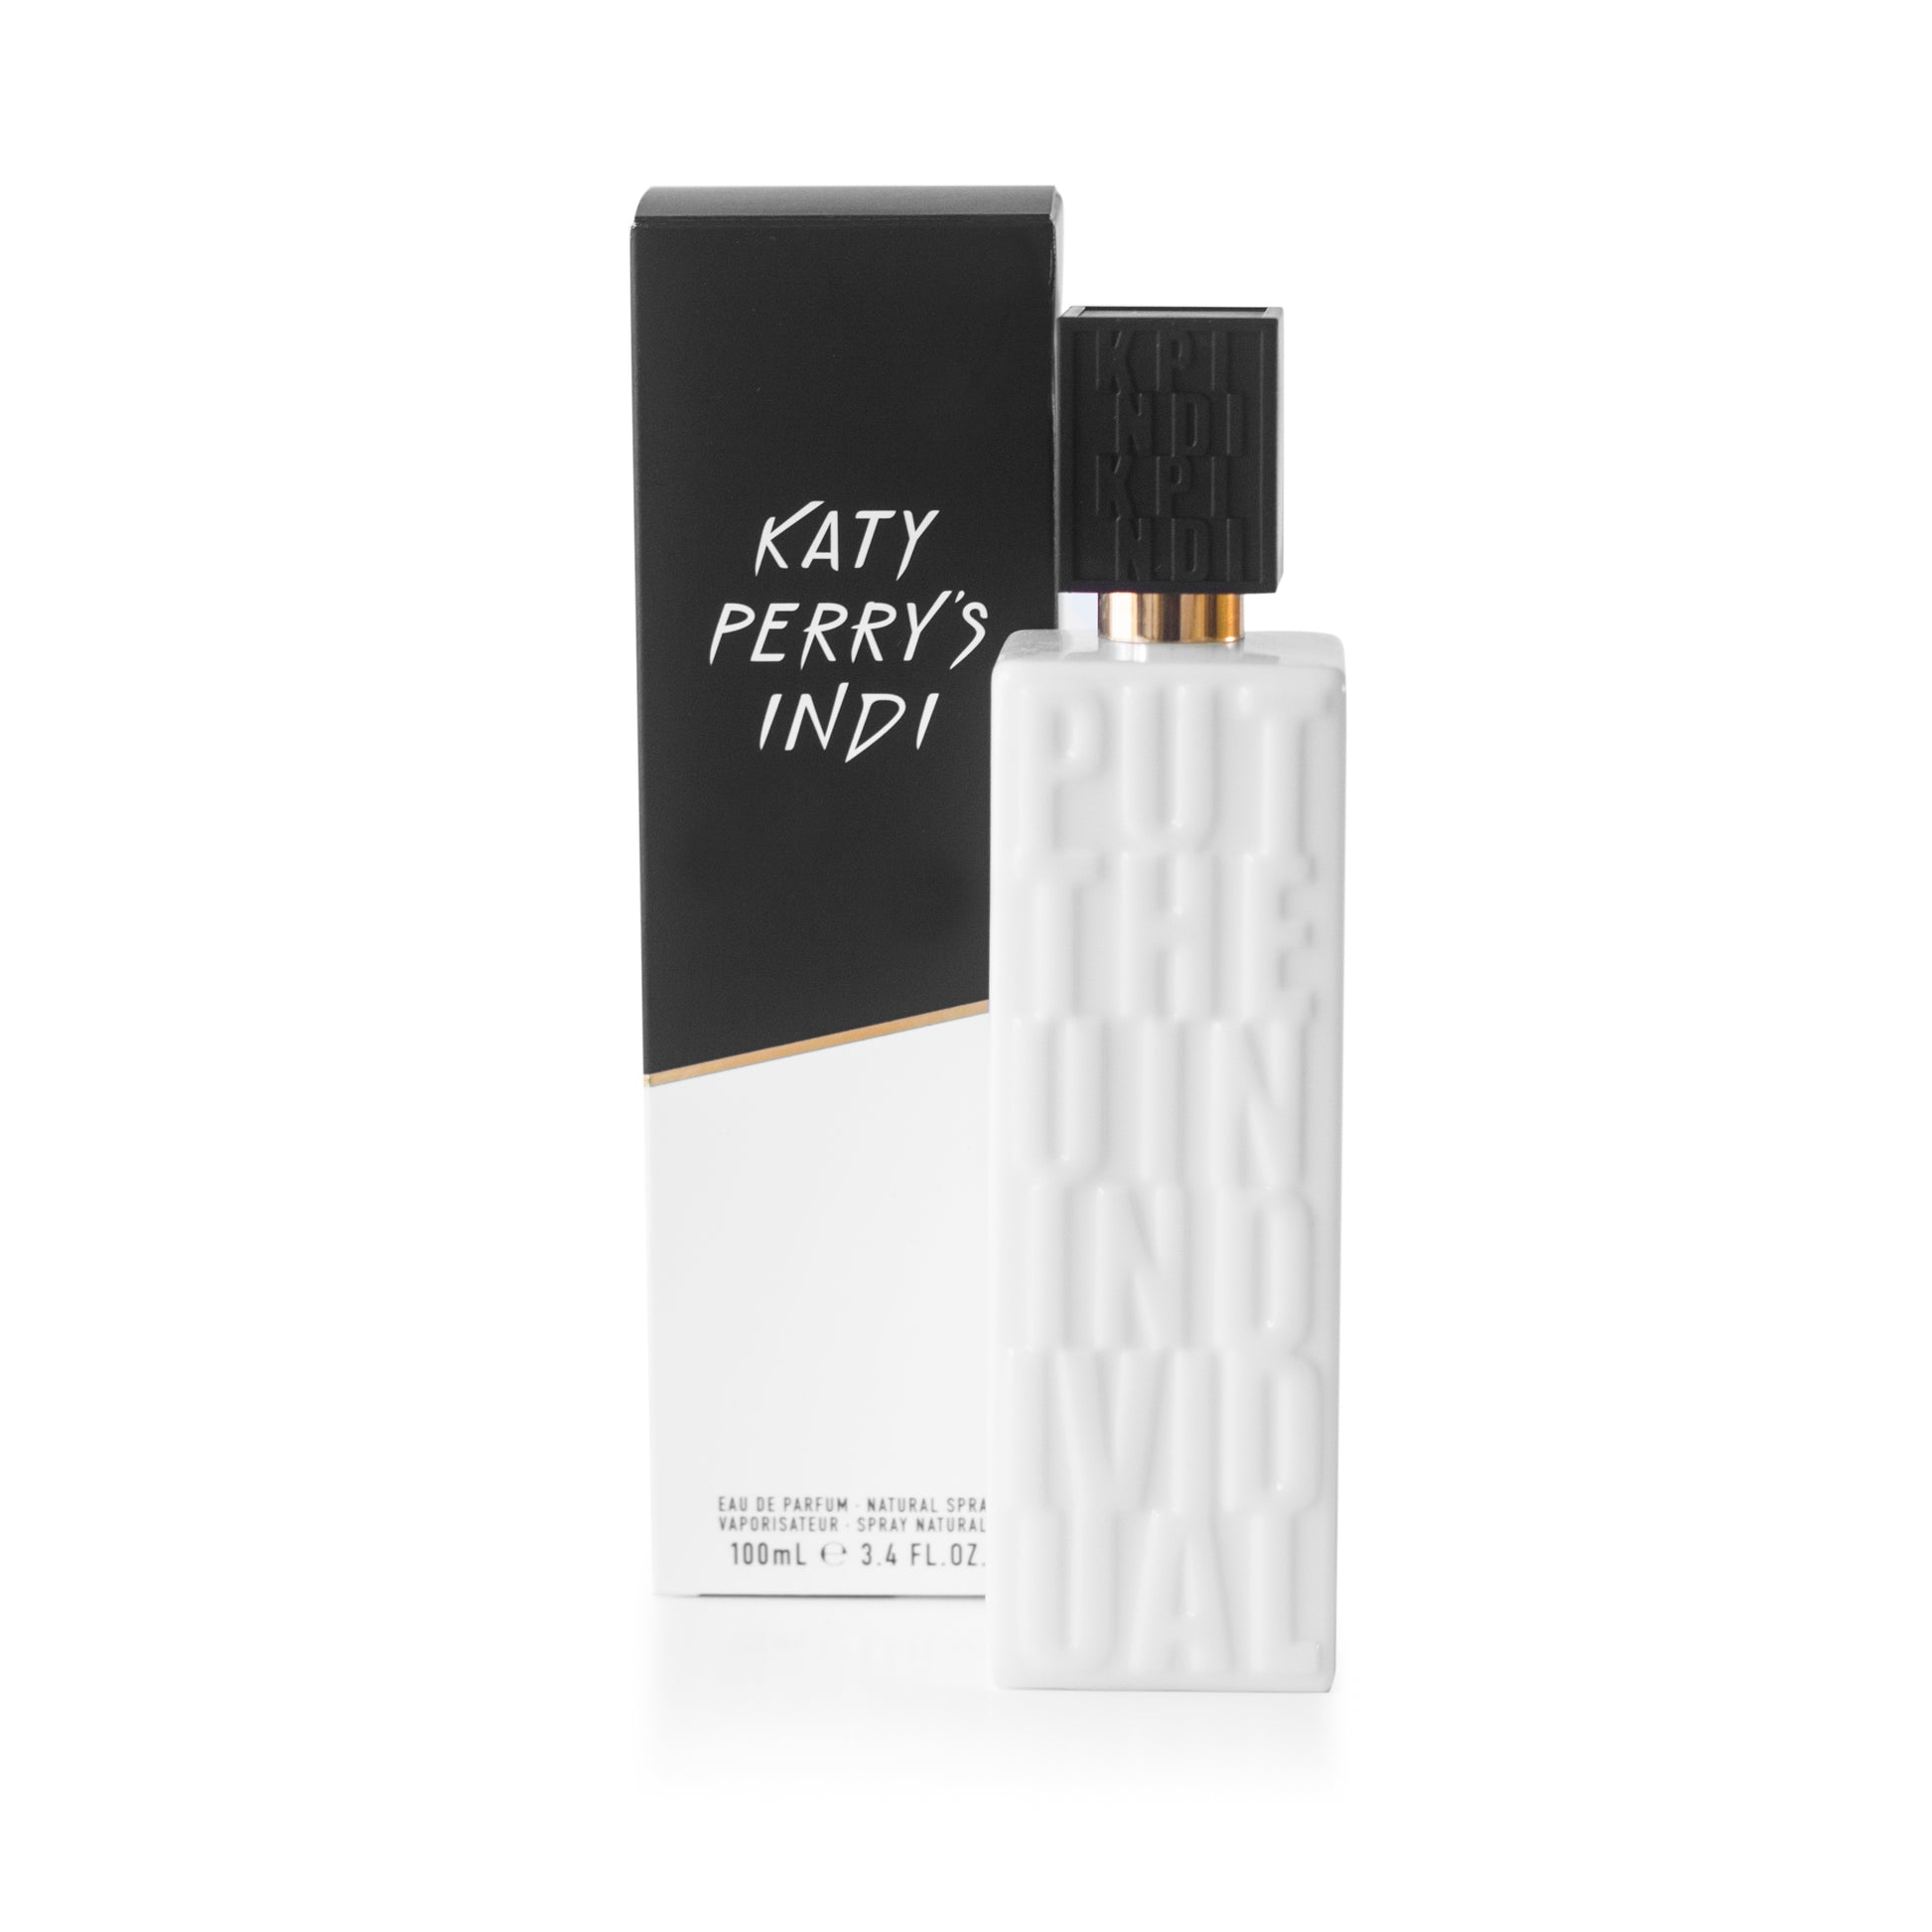 Katy Perry's Indi Eau de Parfum Spray for Women by Katy Perry 3.4 oz. Click to open in modal